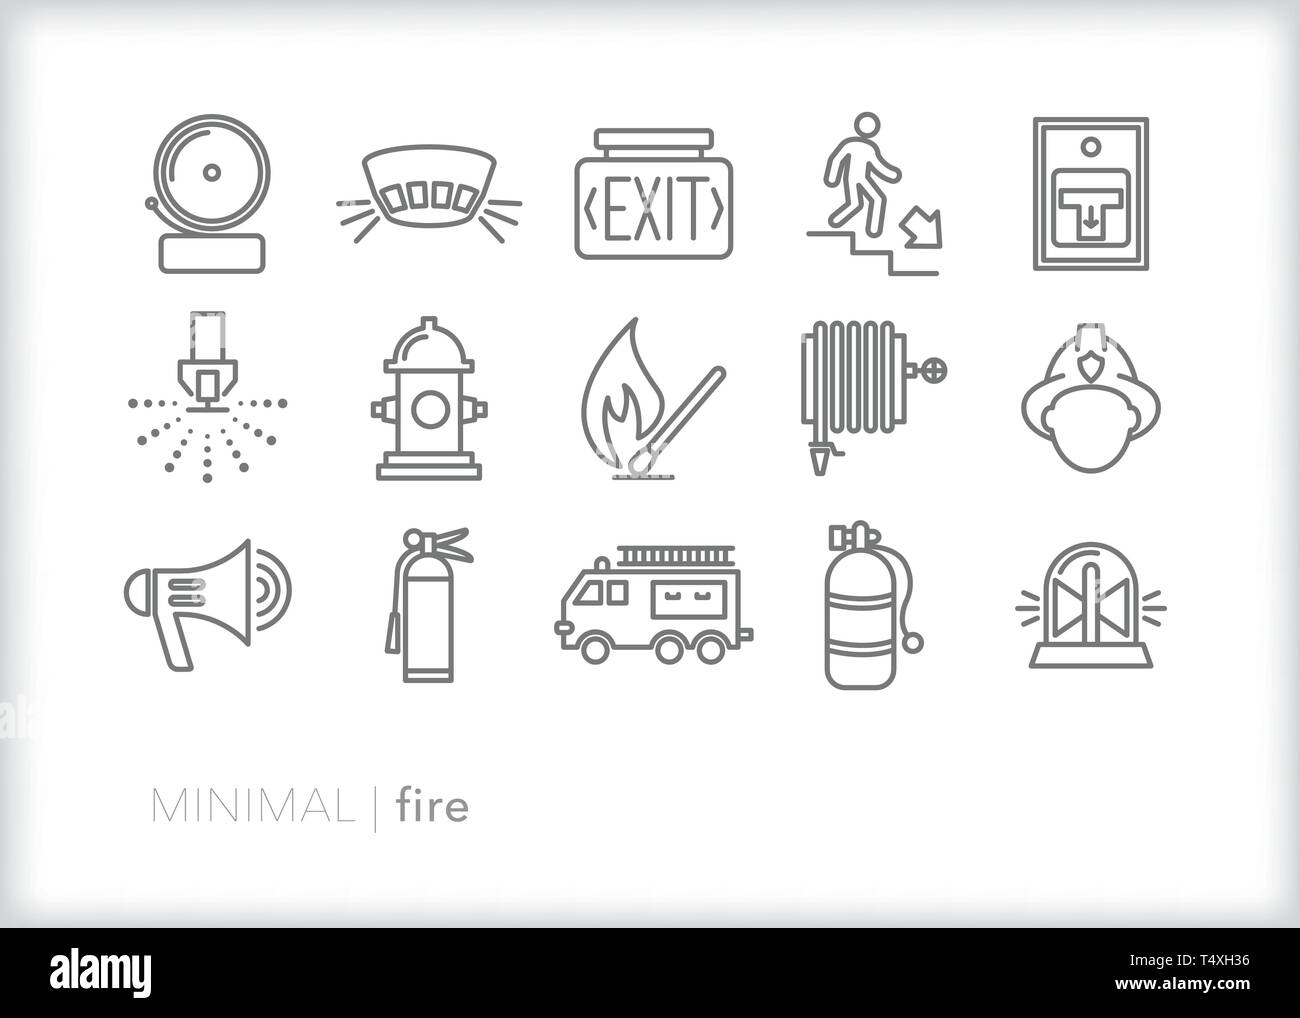 Set of 15 fire safety line icons Stock Vector